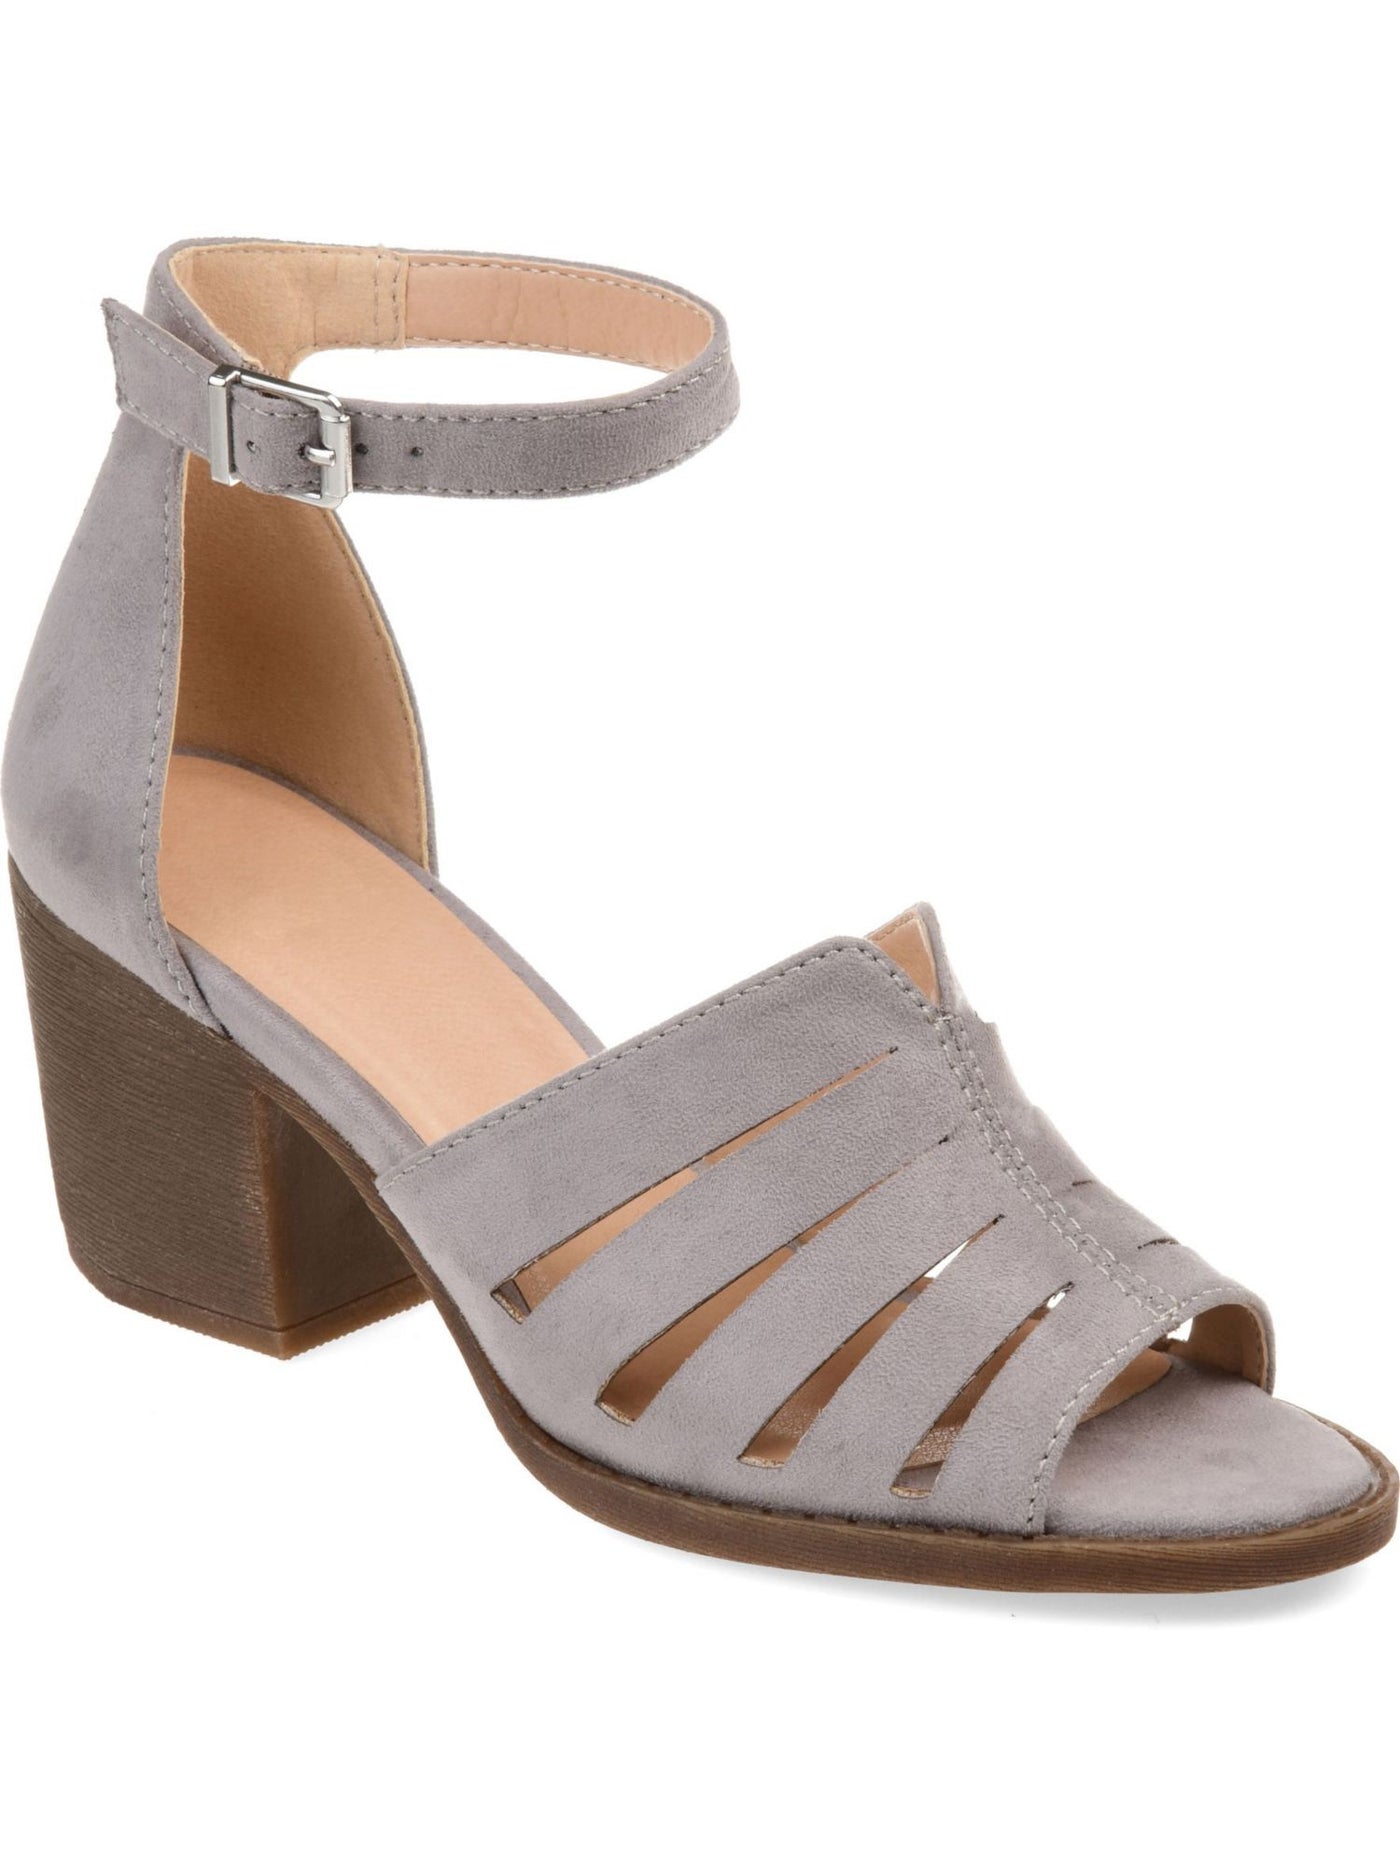 JOURNEE COLLECTION Womens Gray Caged Design Ankle Strap Taryn Round Toe Buckle Sandals Shoes 7